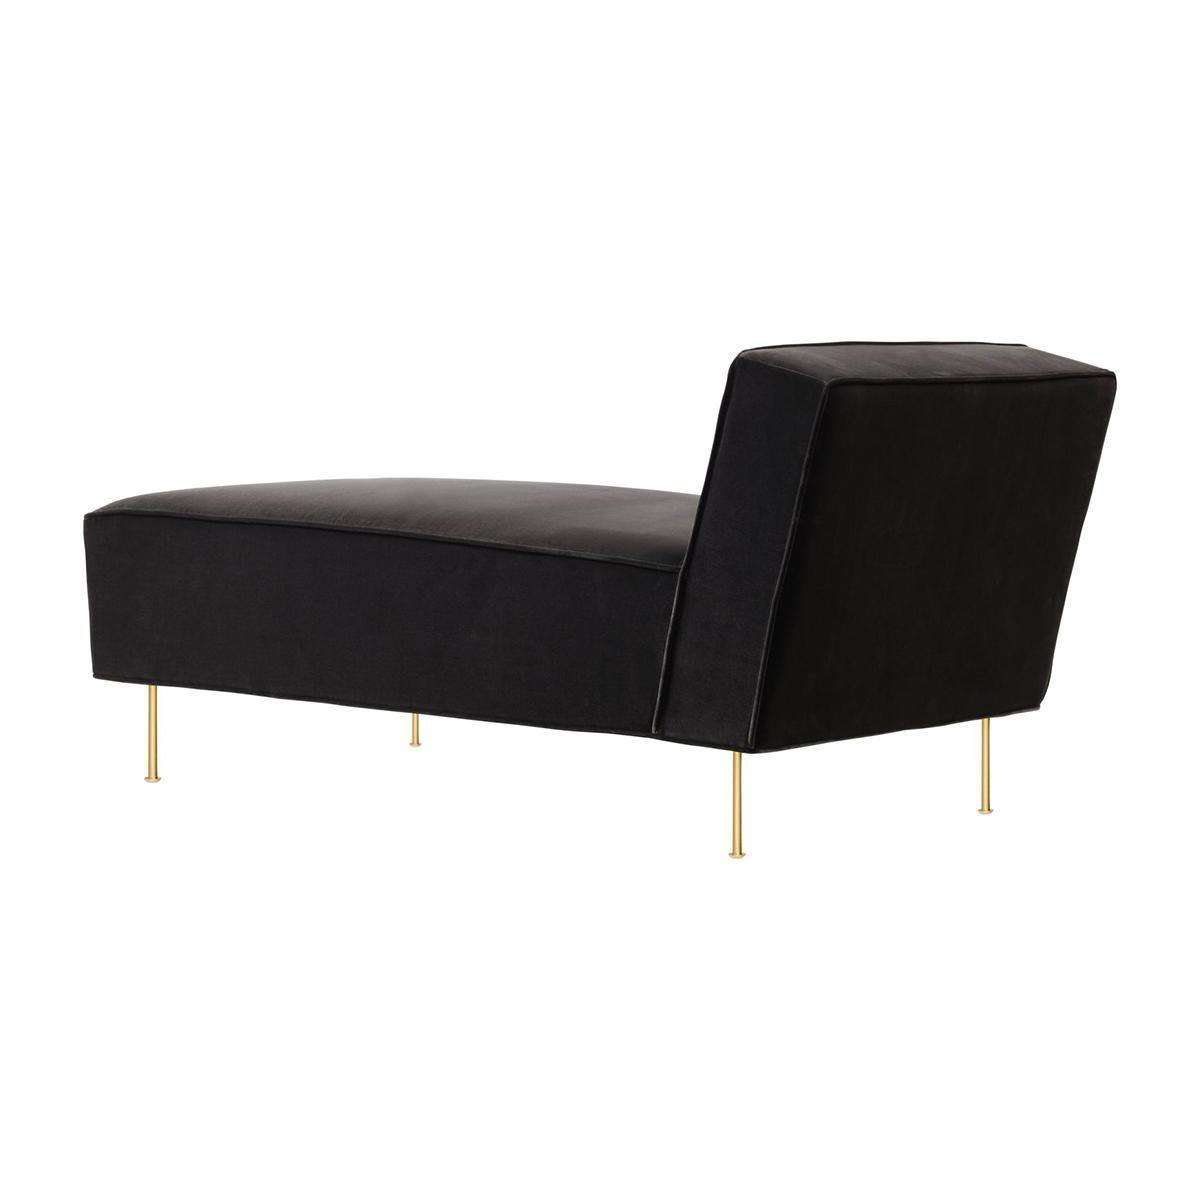 Contemporary Modern Line Cotton Velour Chaise Lounge